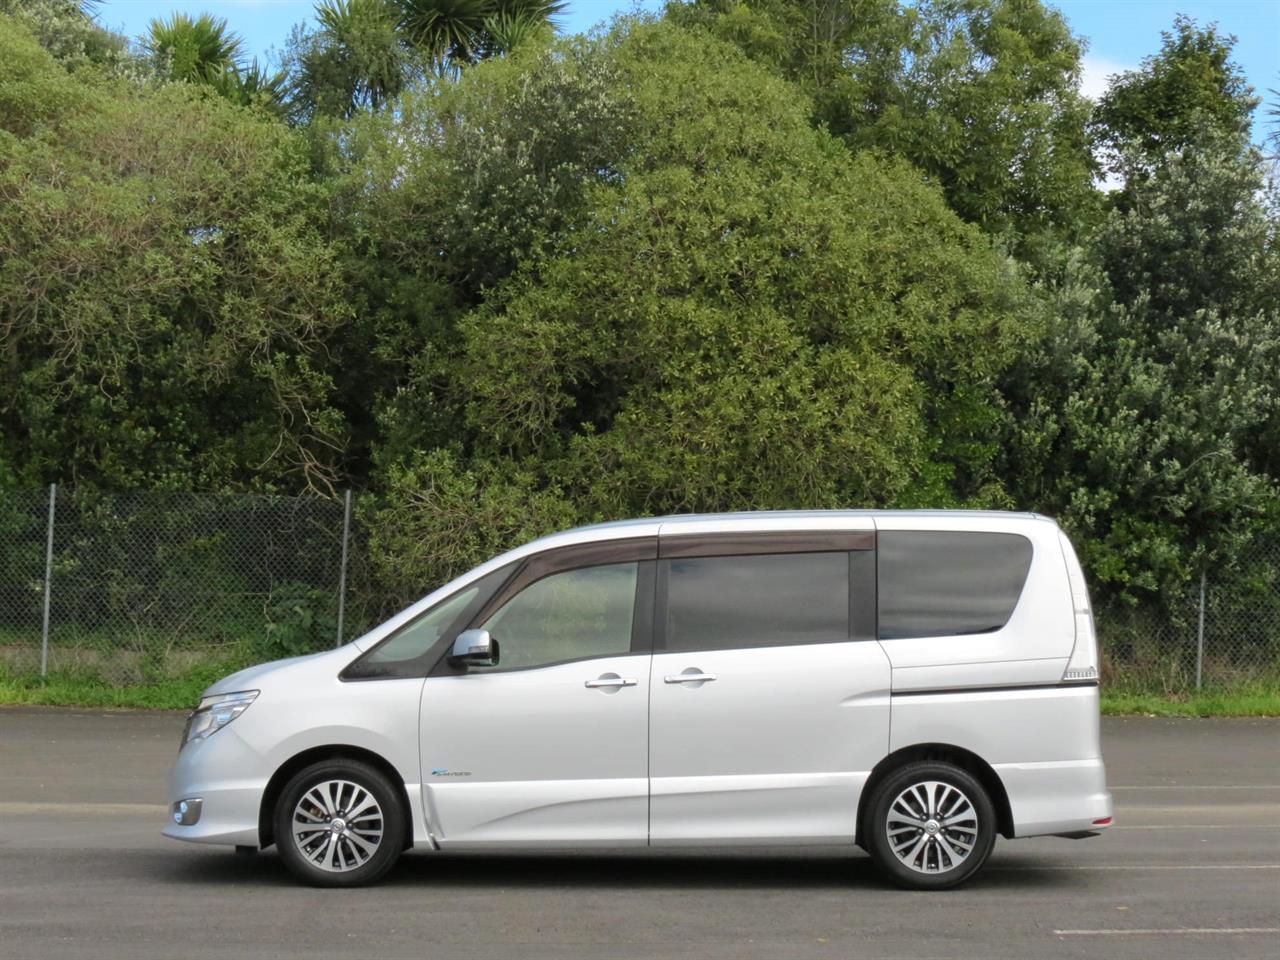 2014 Nissan Serena only $50 weekly